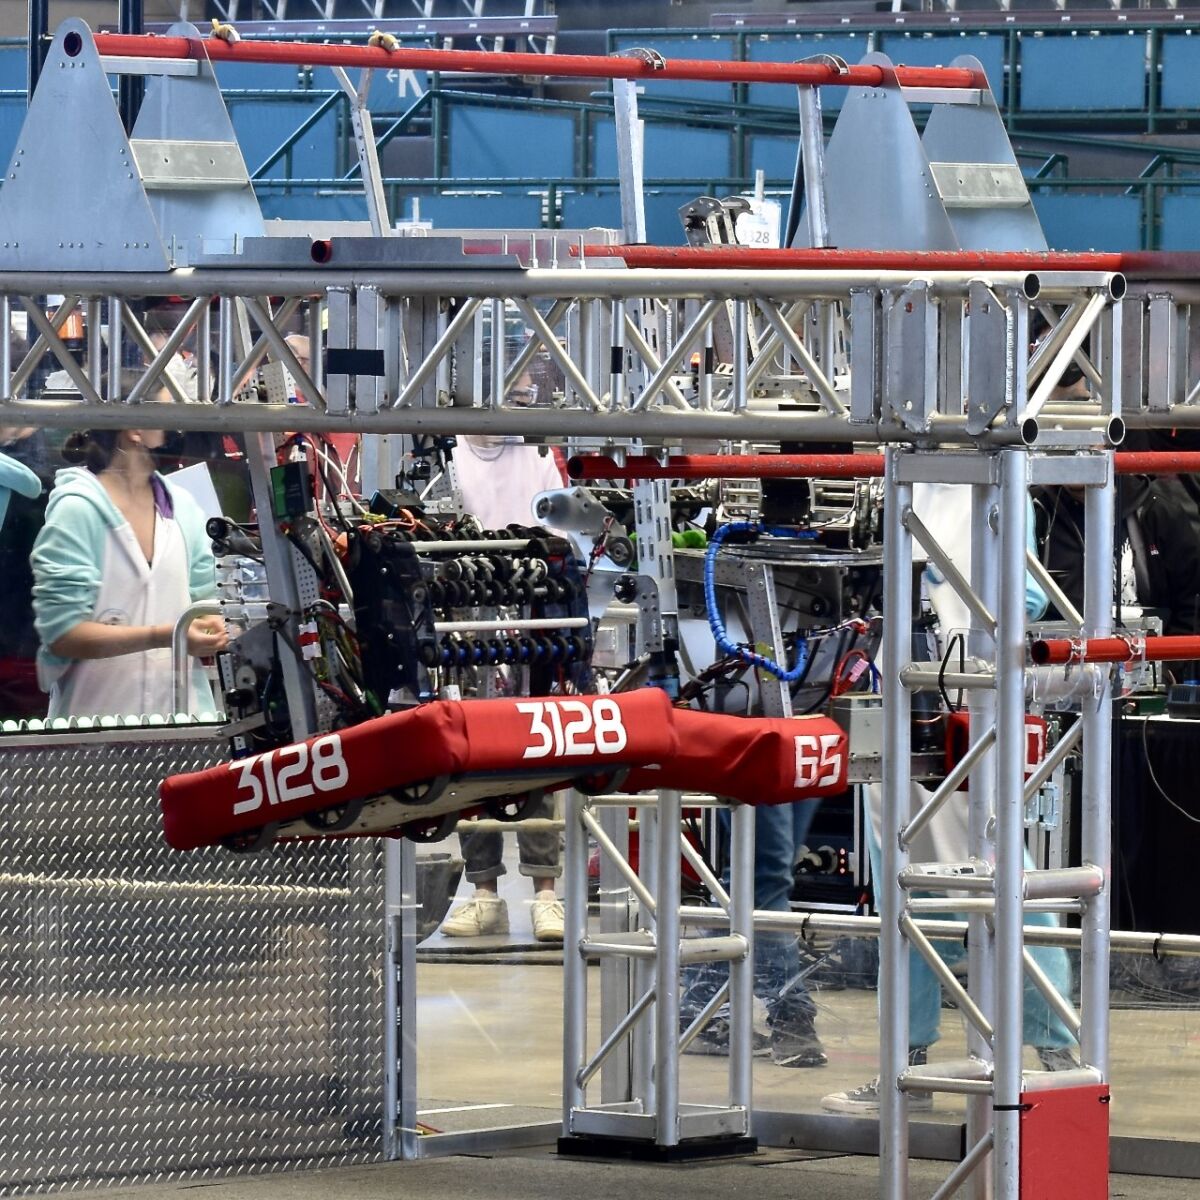 Team 3128 robot hanging from the traversal bar along with alliance partner 6560.